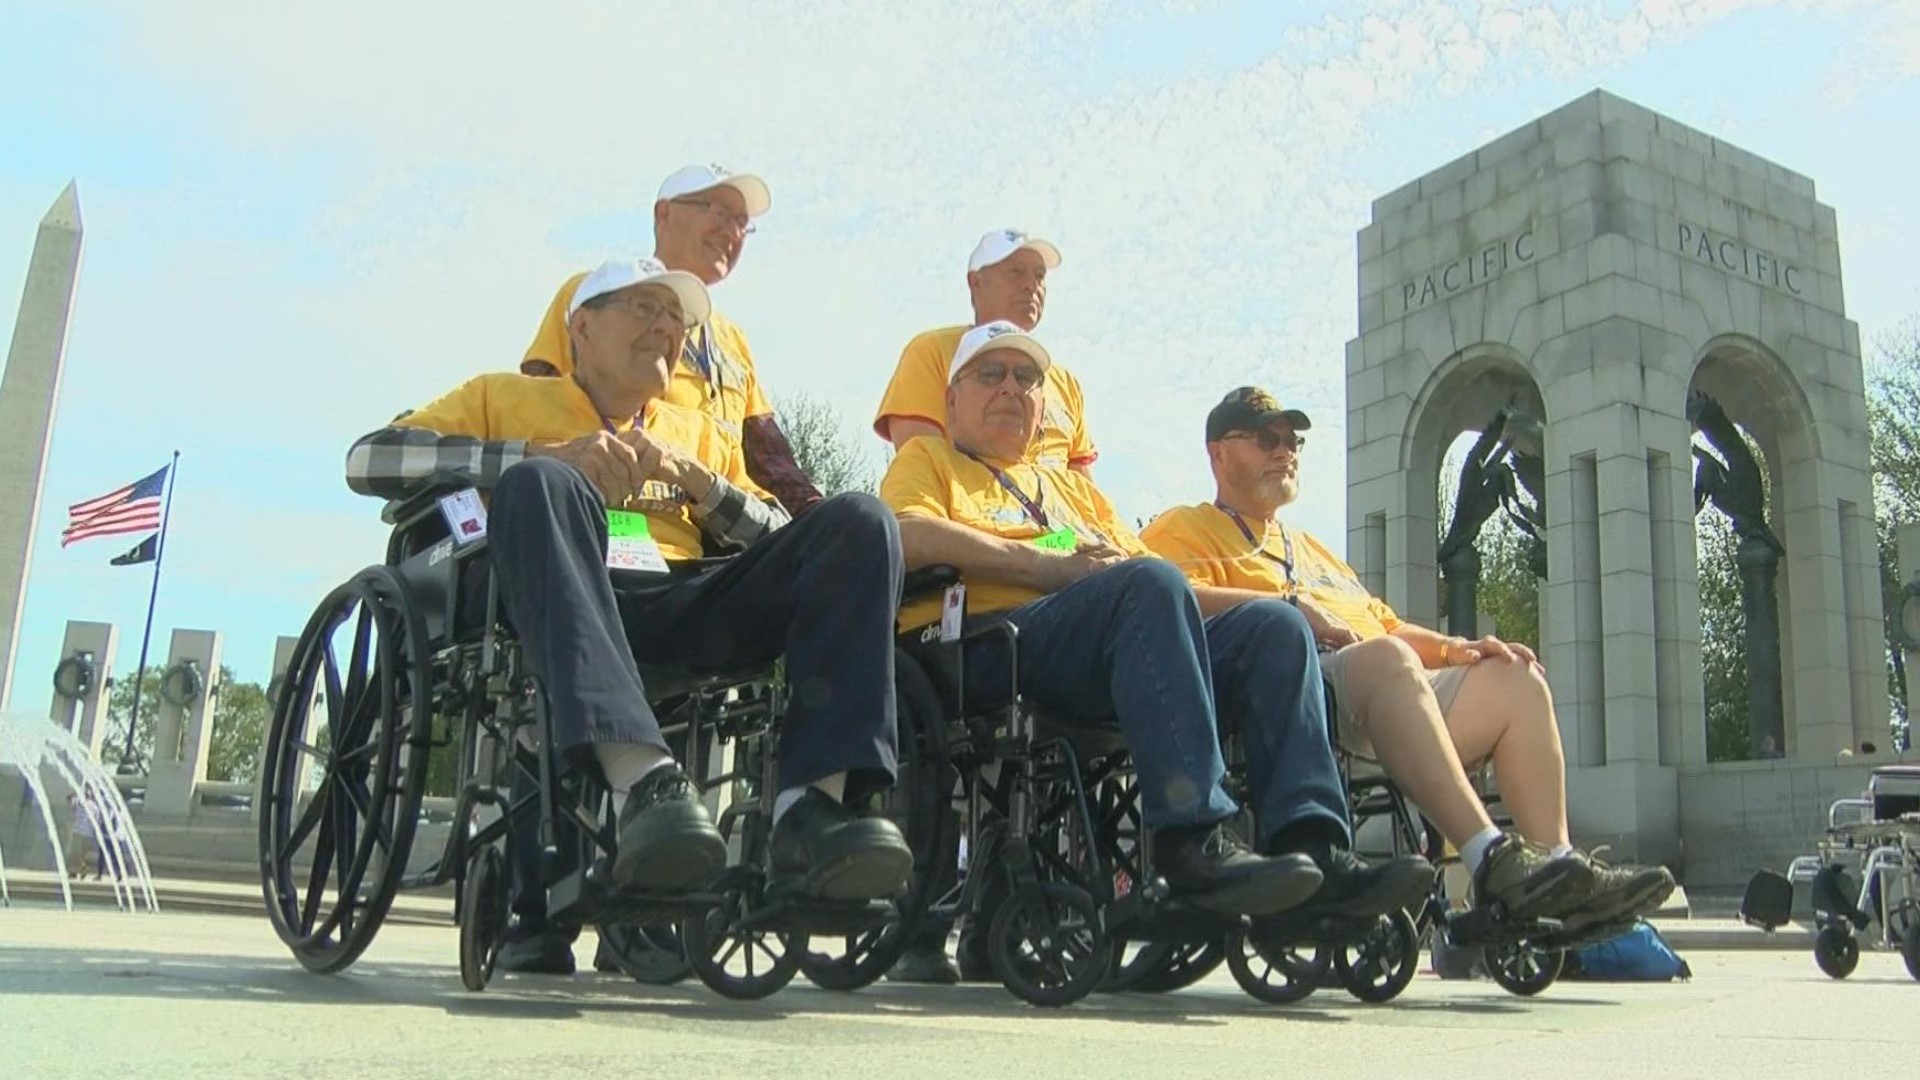 The group will take 81 veterans to see memorials in Washington D.C. on June 7.